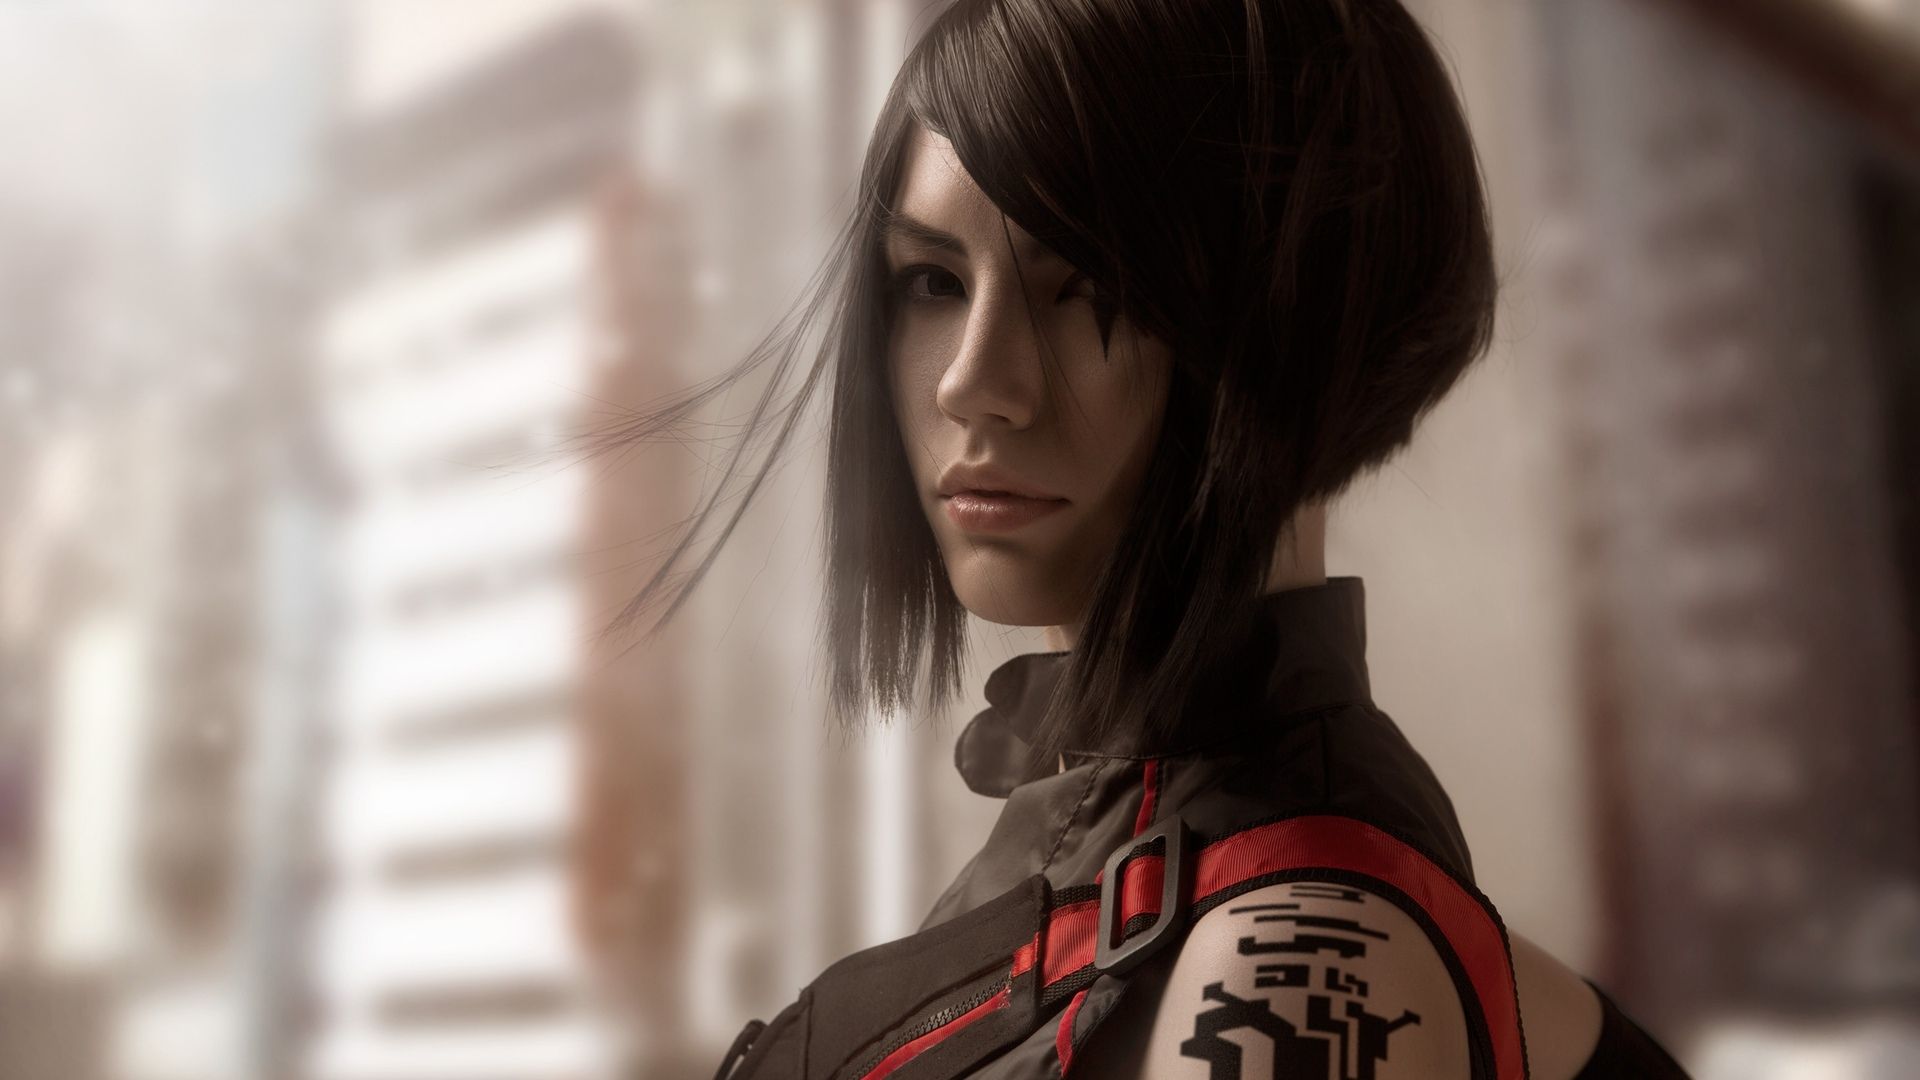 Promotional image of Faith Connors in Mirror's Edge Catalyst.